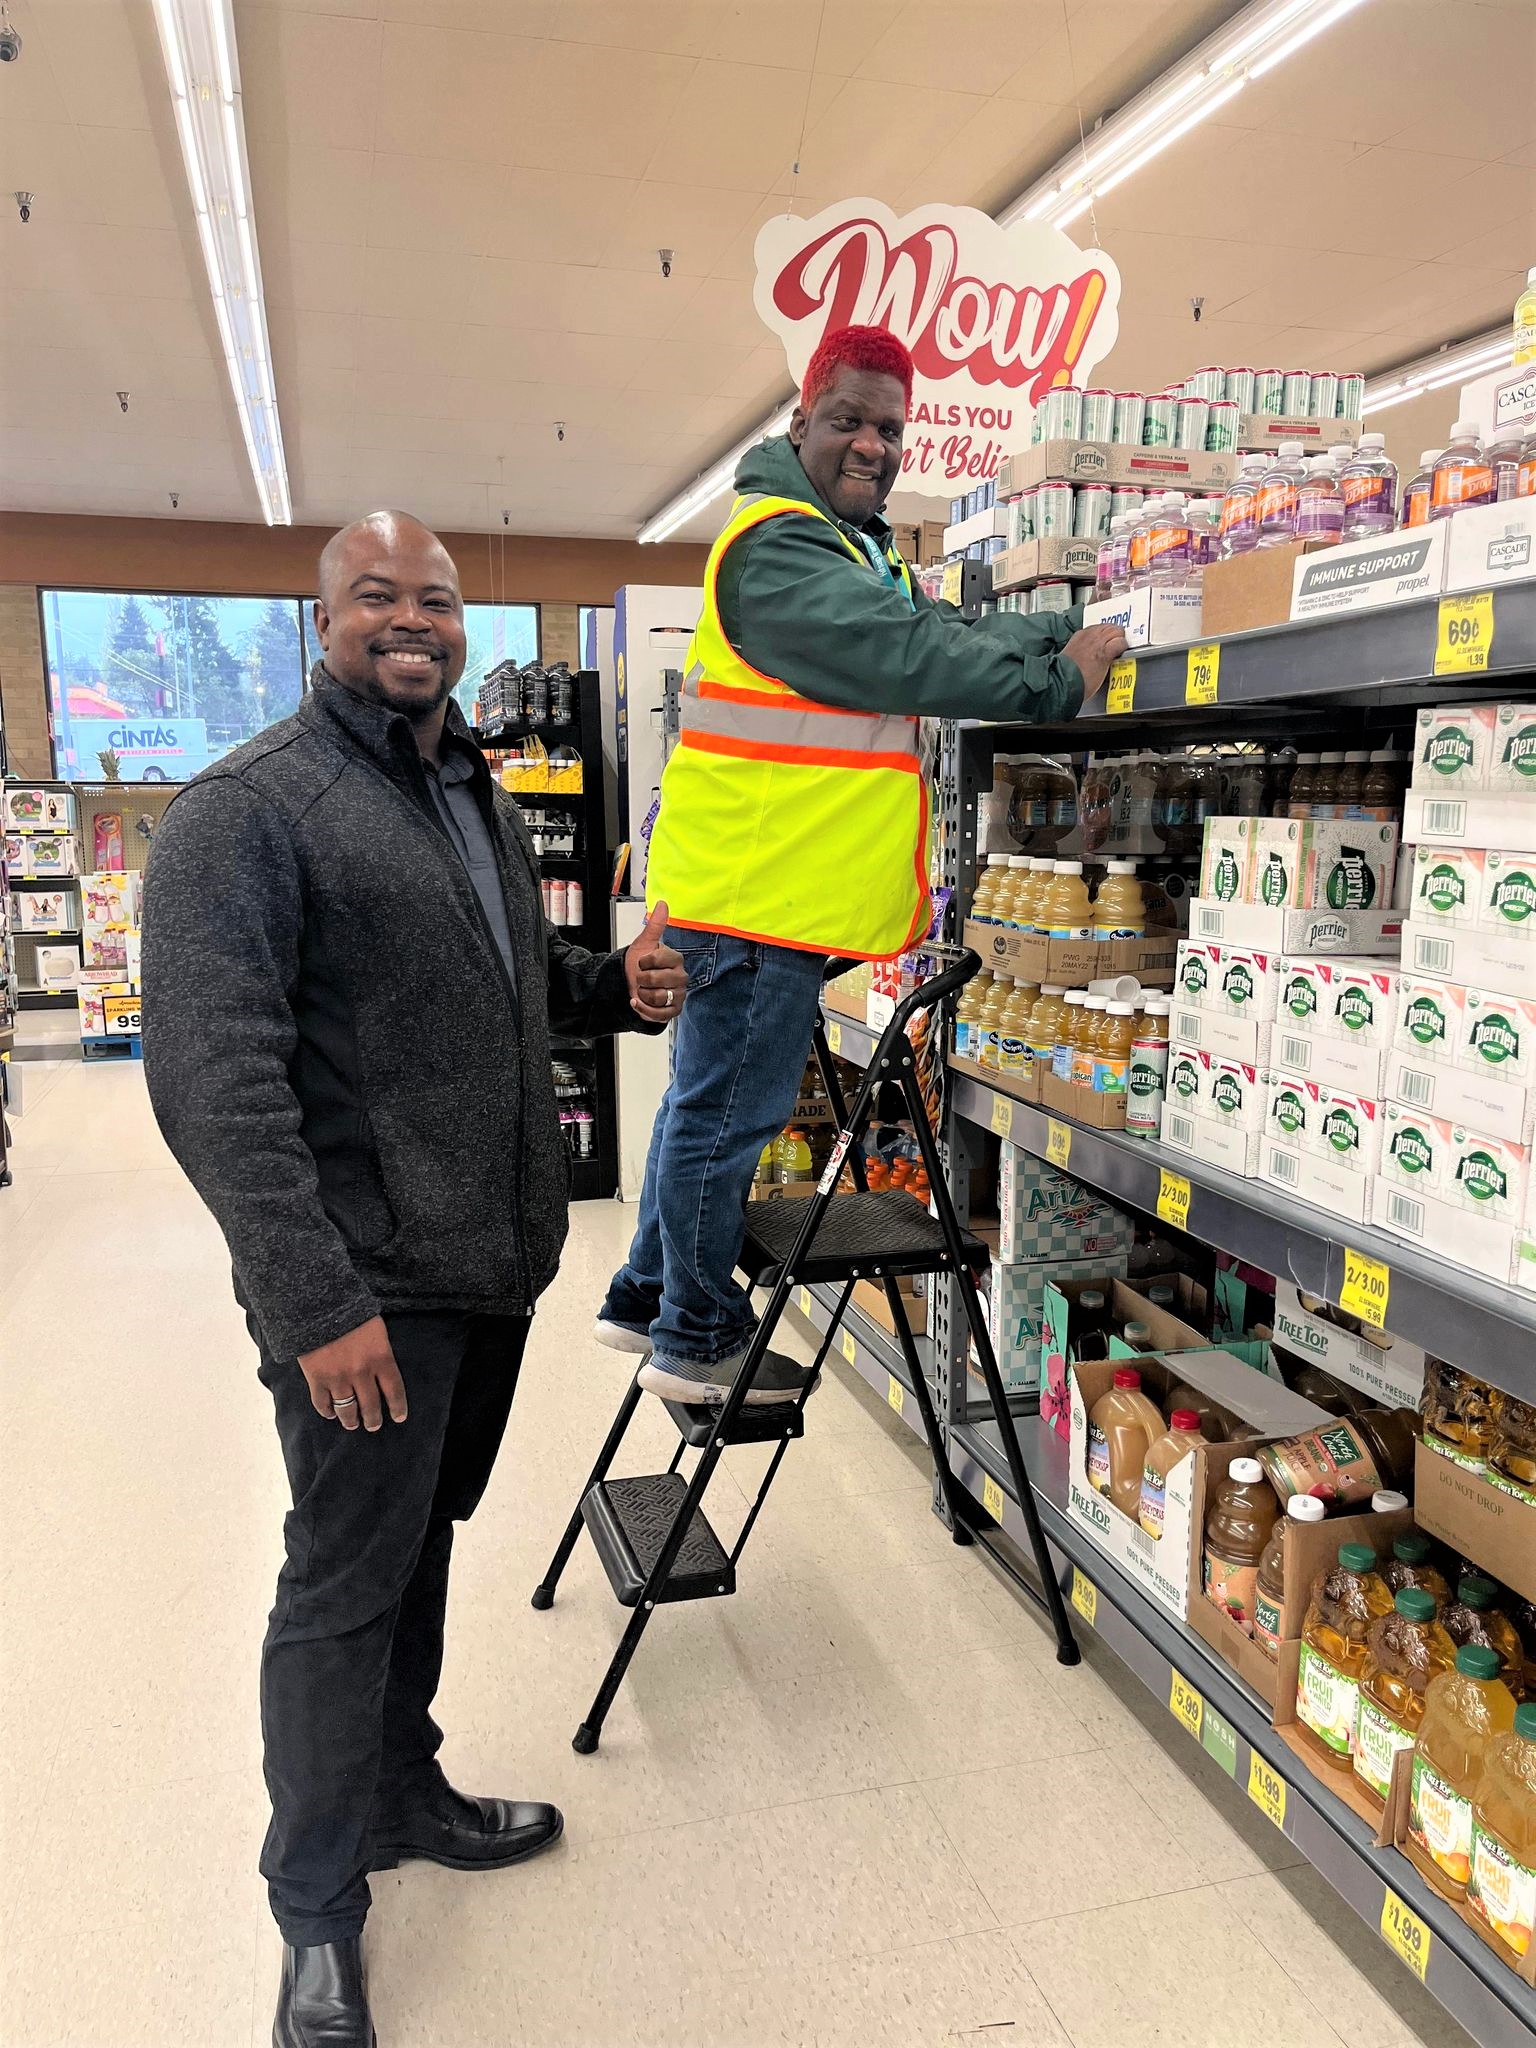 Image: Two men in a Grocery Store aisle. One stands on a step ladder wearing a high-visibility vest and stocks shelves. The other man stands behind him smiling at the camera and giving a thumbs-up.